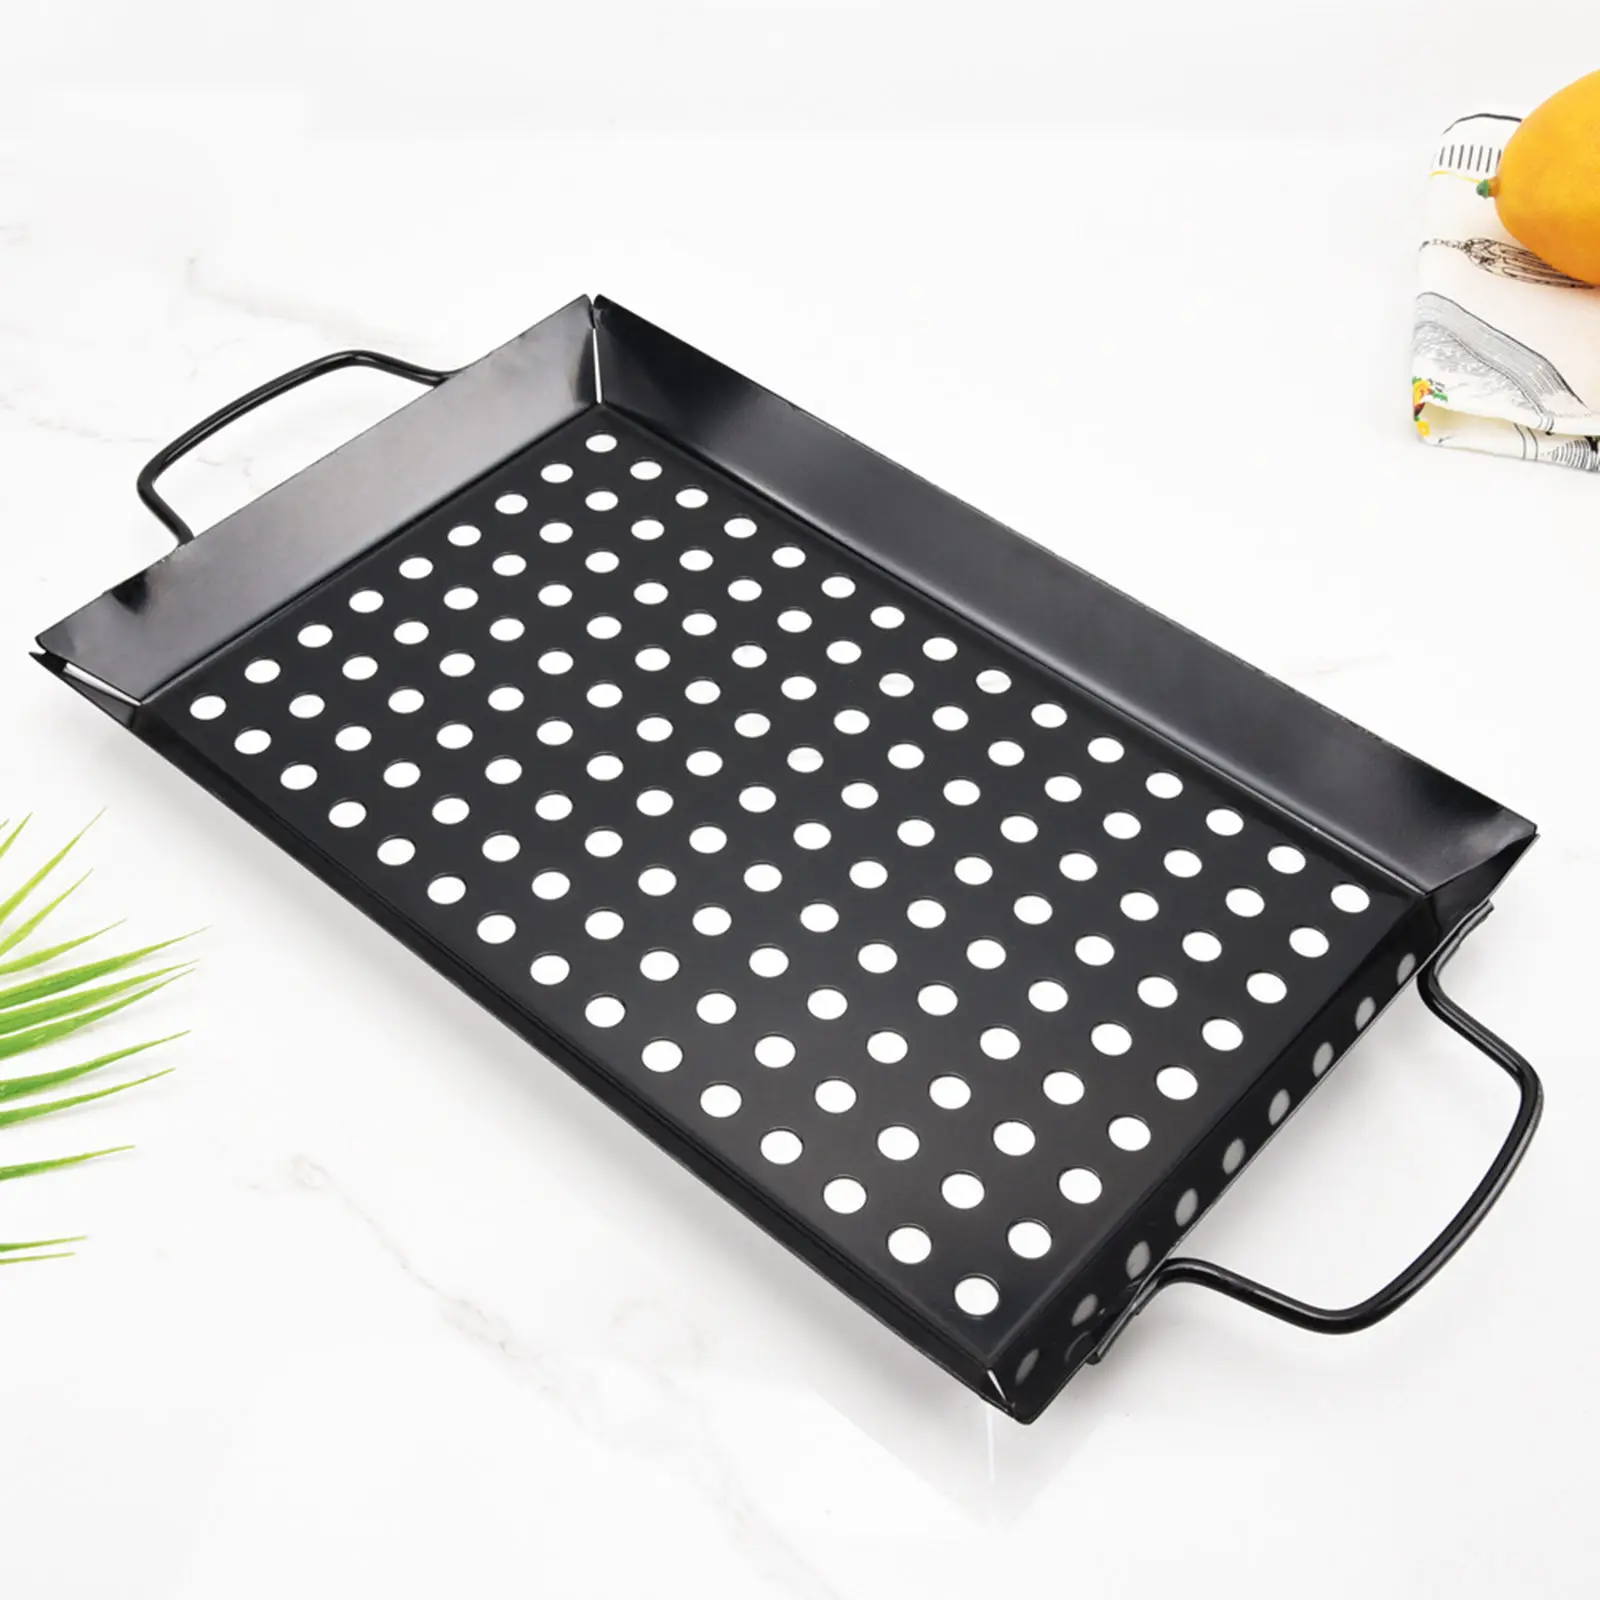 Large Nonstick BBQ Pans Grill Barbecue Basket for Cooking Vegetables Meat